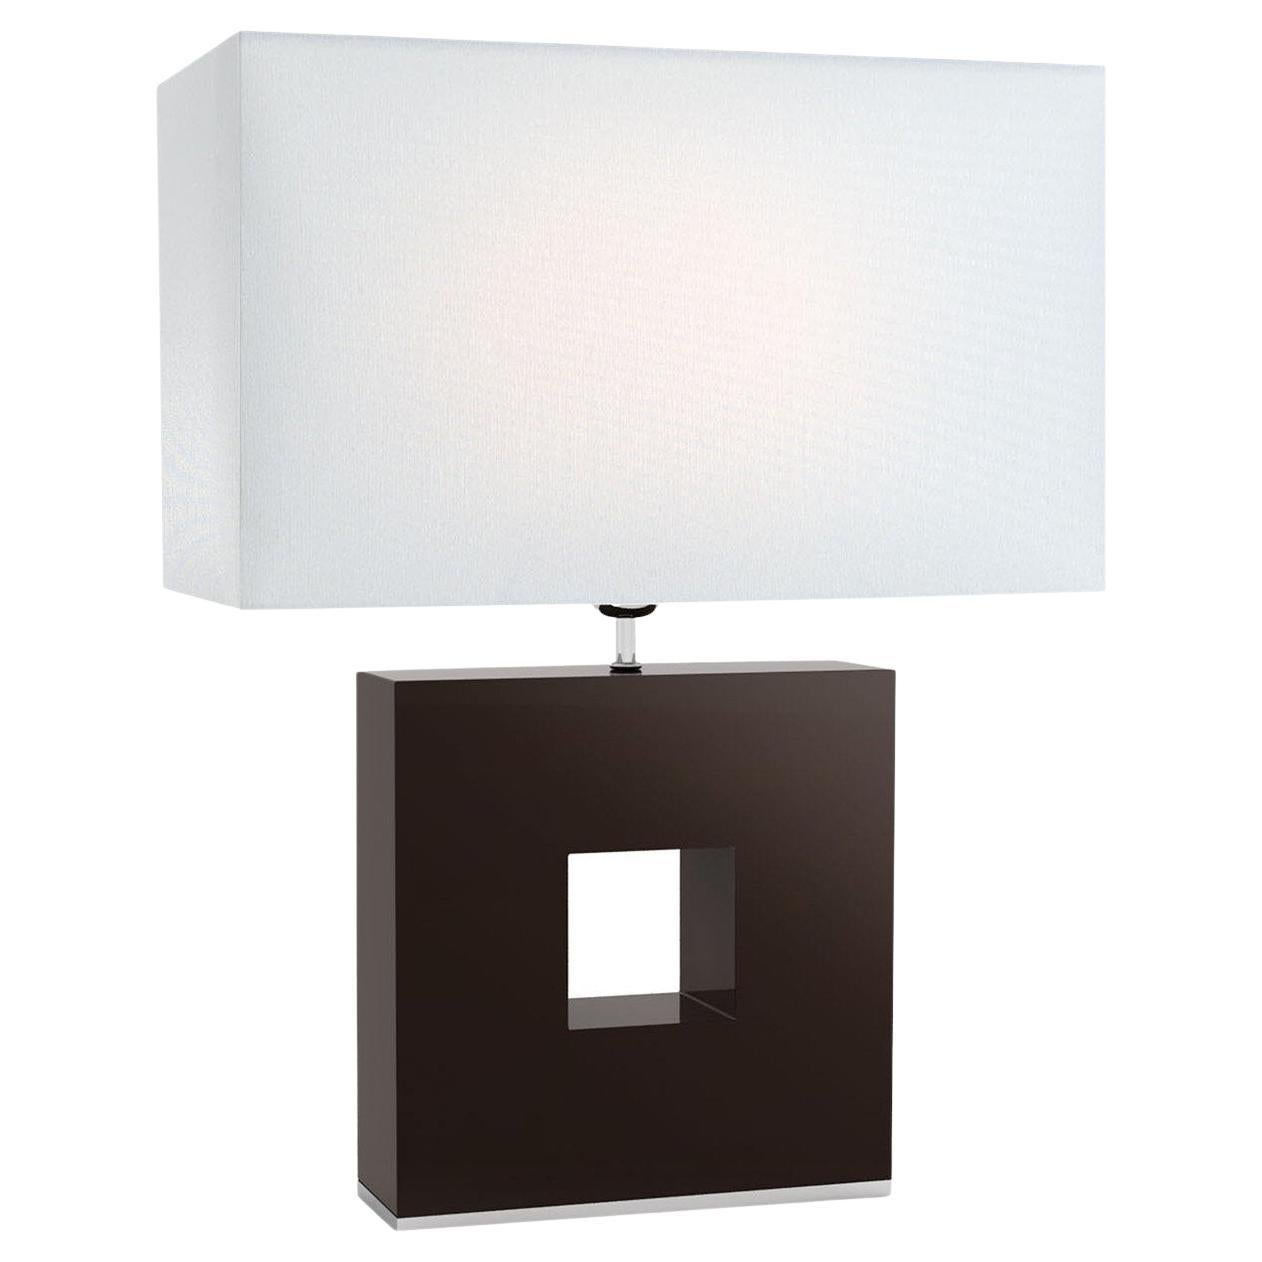 Cobalto Brown Table Lamp with White Shade